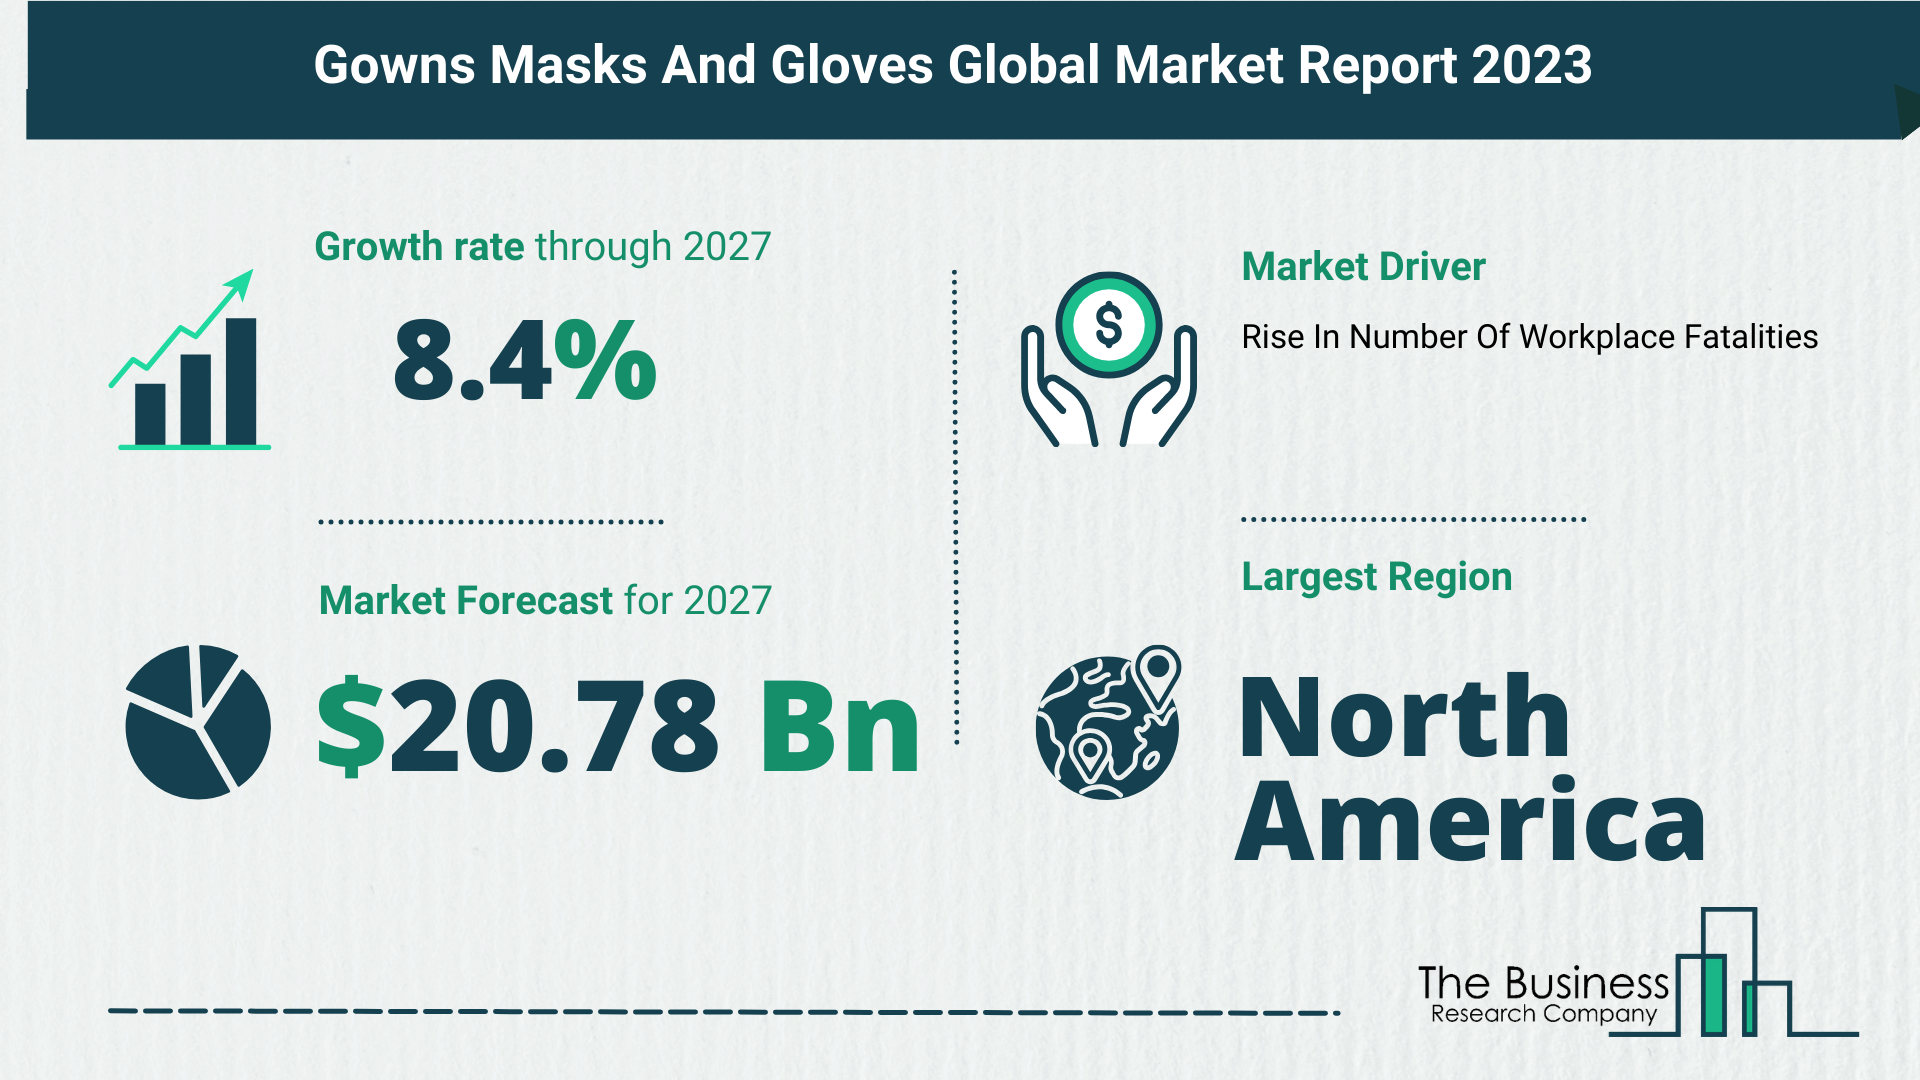 How Will The Gowns Masks And Gloves Market Size Grow In The Coming Years?